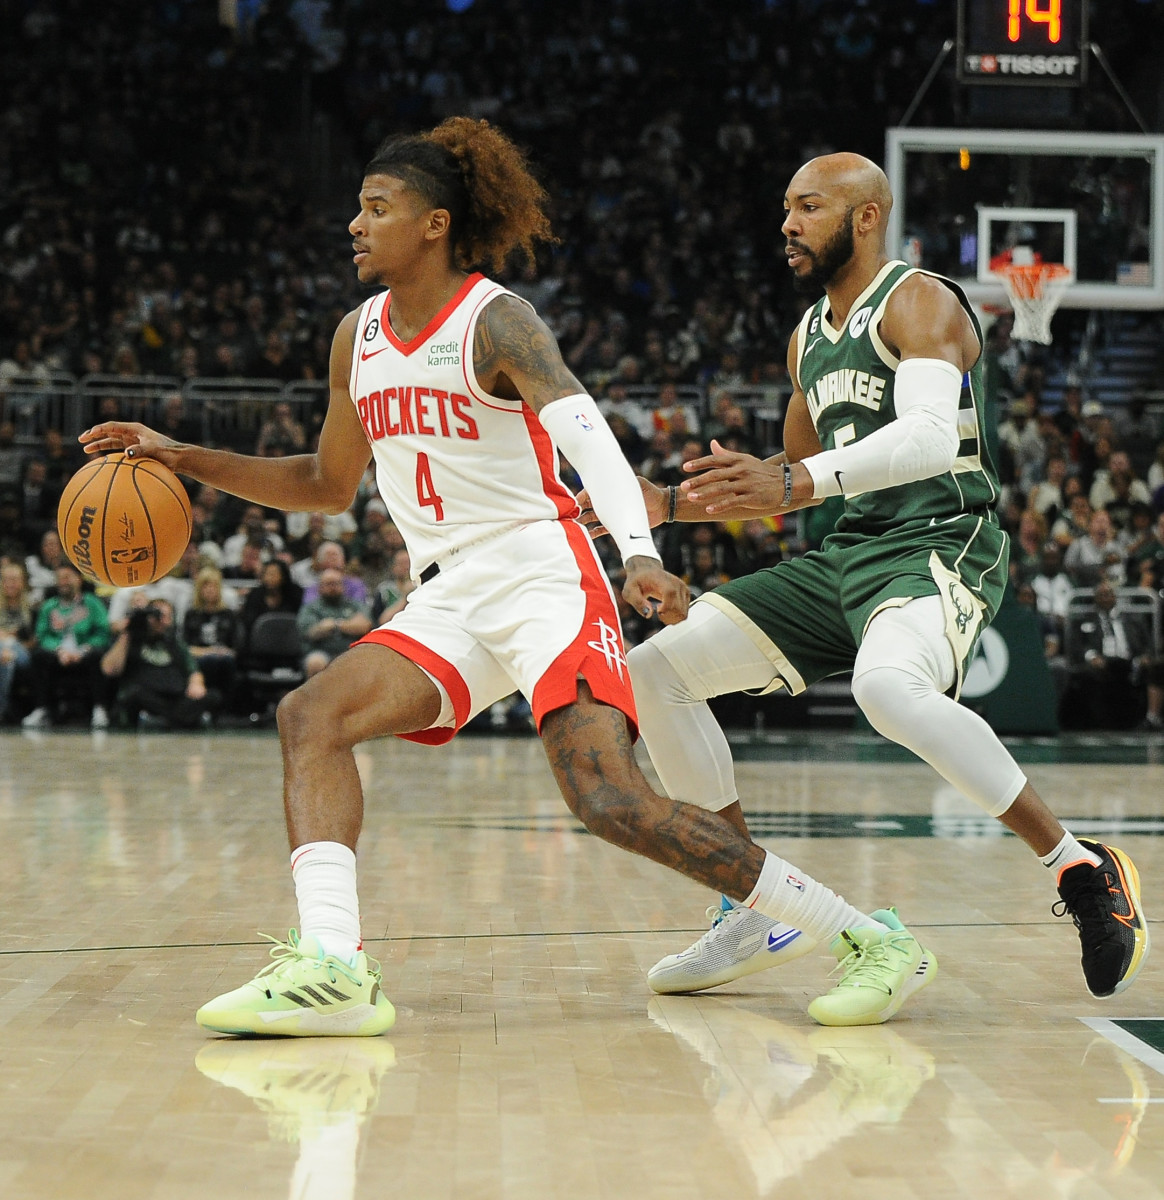 Game day preview and injury report: The Milwaukee Bucks visit the Houston Rockets